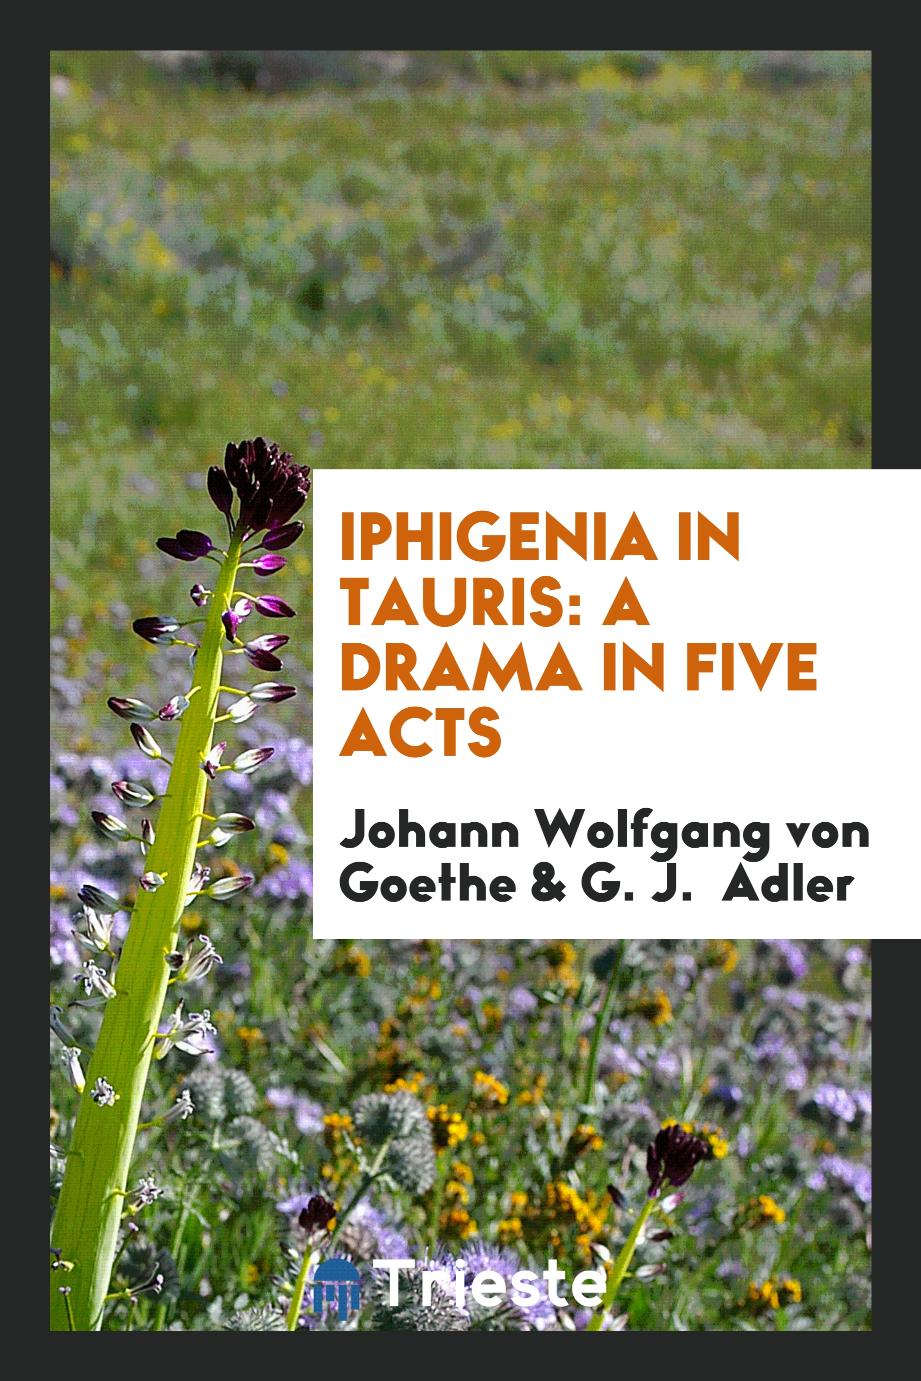 Iphigenia in Tauris: A Drama in Five Acts